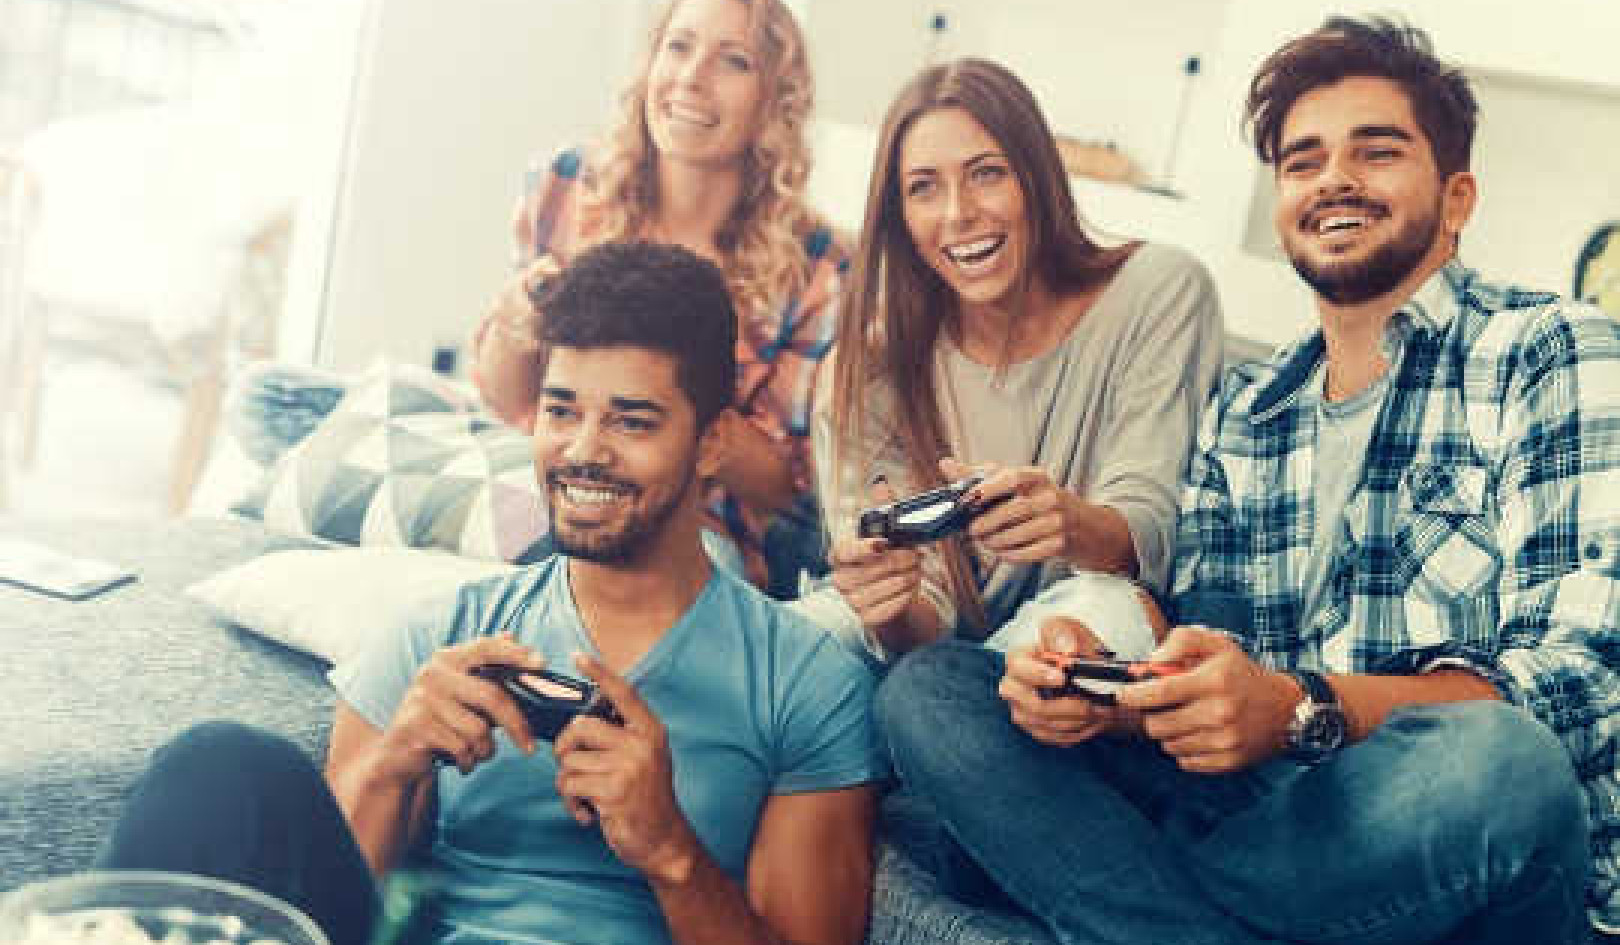 Video Games Could Help Uncover Your Hidden Talents And Make You Happier